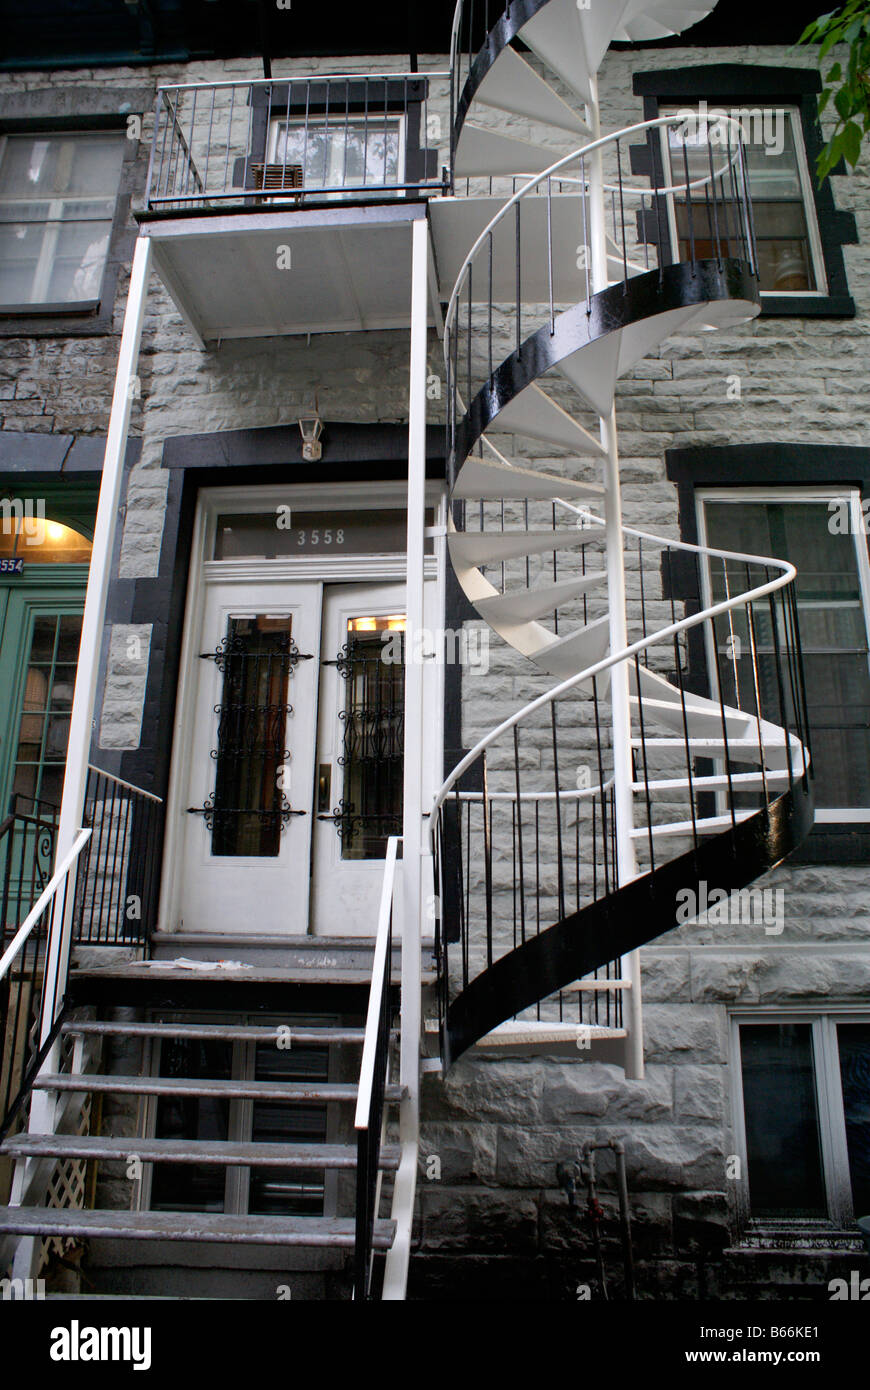 Black and white metal spiral staircase of an old house in Le Plateau Mont Royal, Montreal, Quebec, Canada Stock Photo